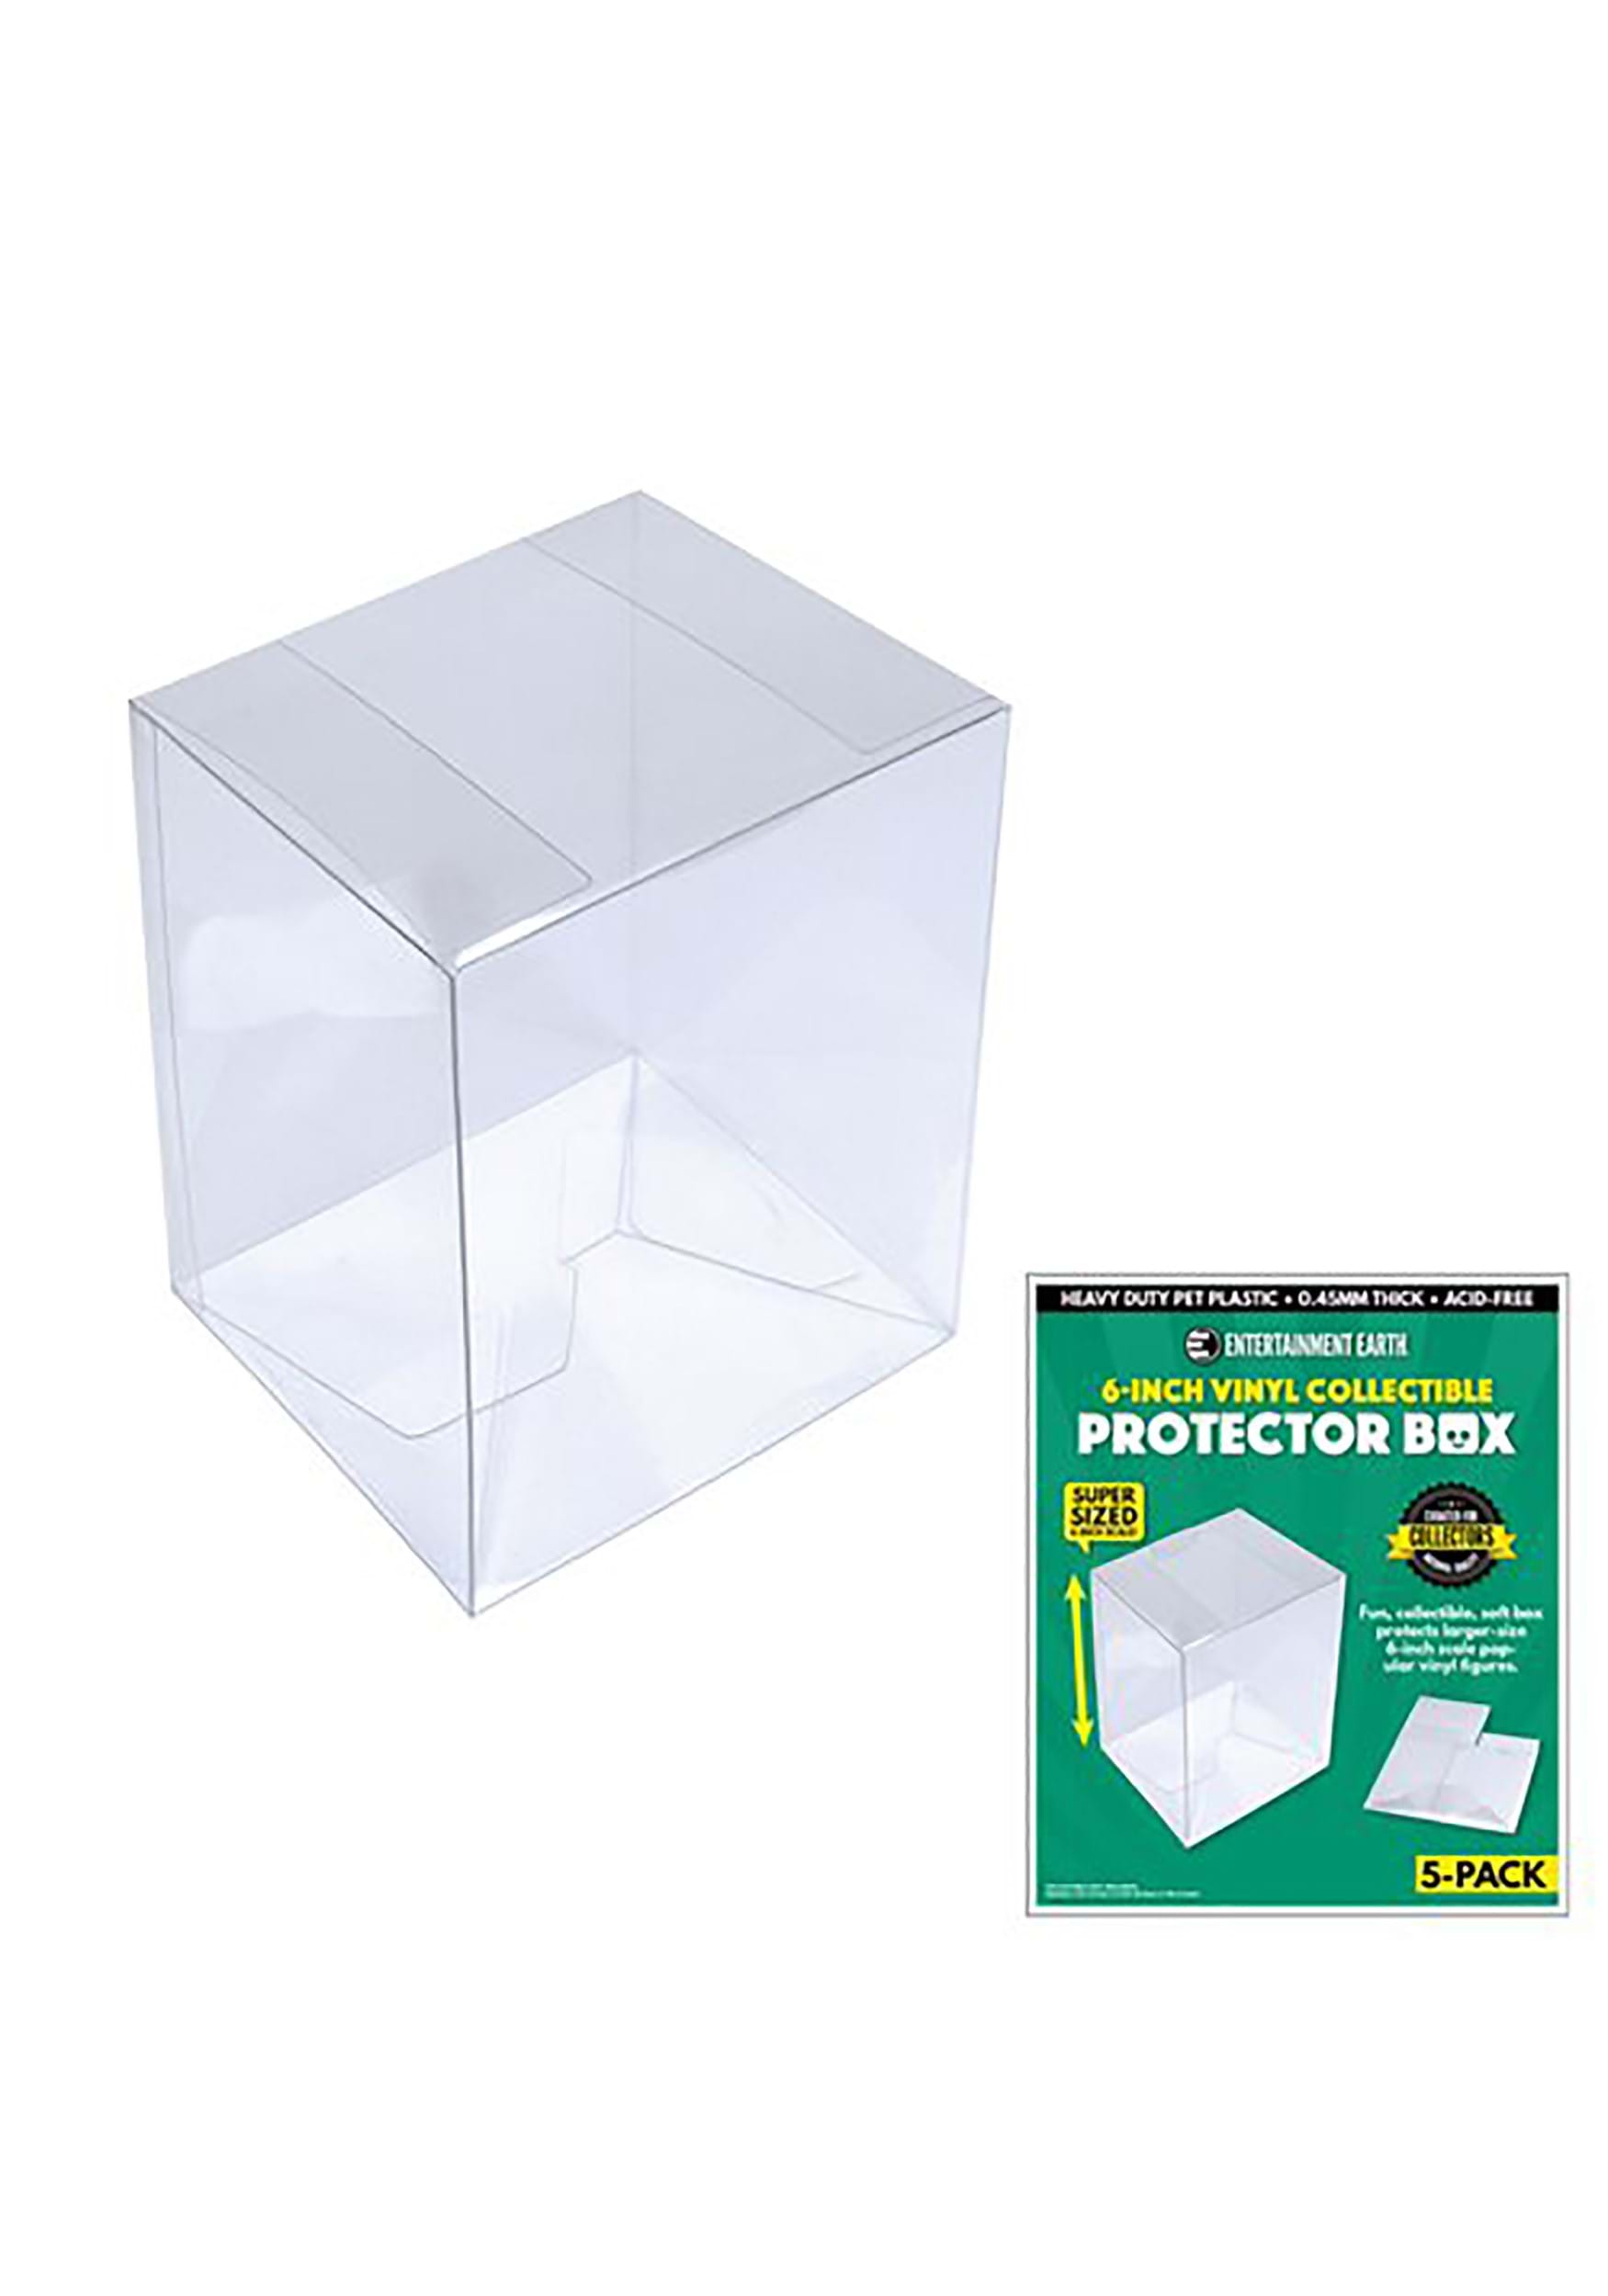 Vinyl Collectible 6-Inch Collapsible Protector Box